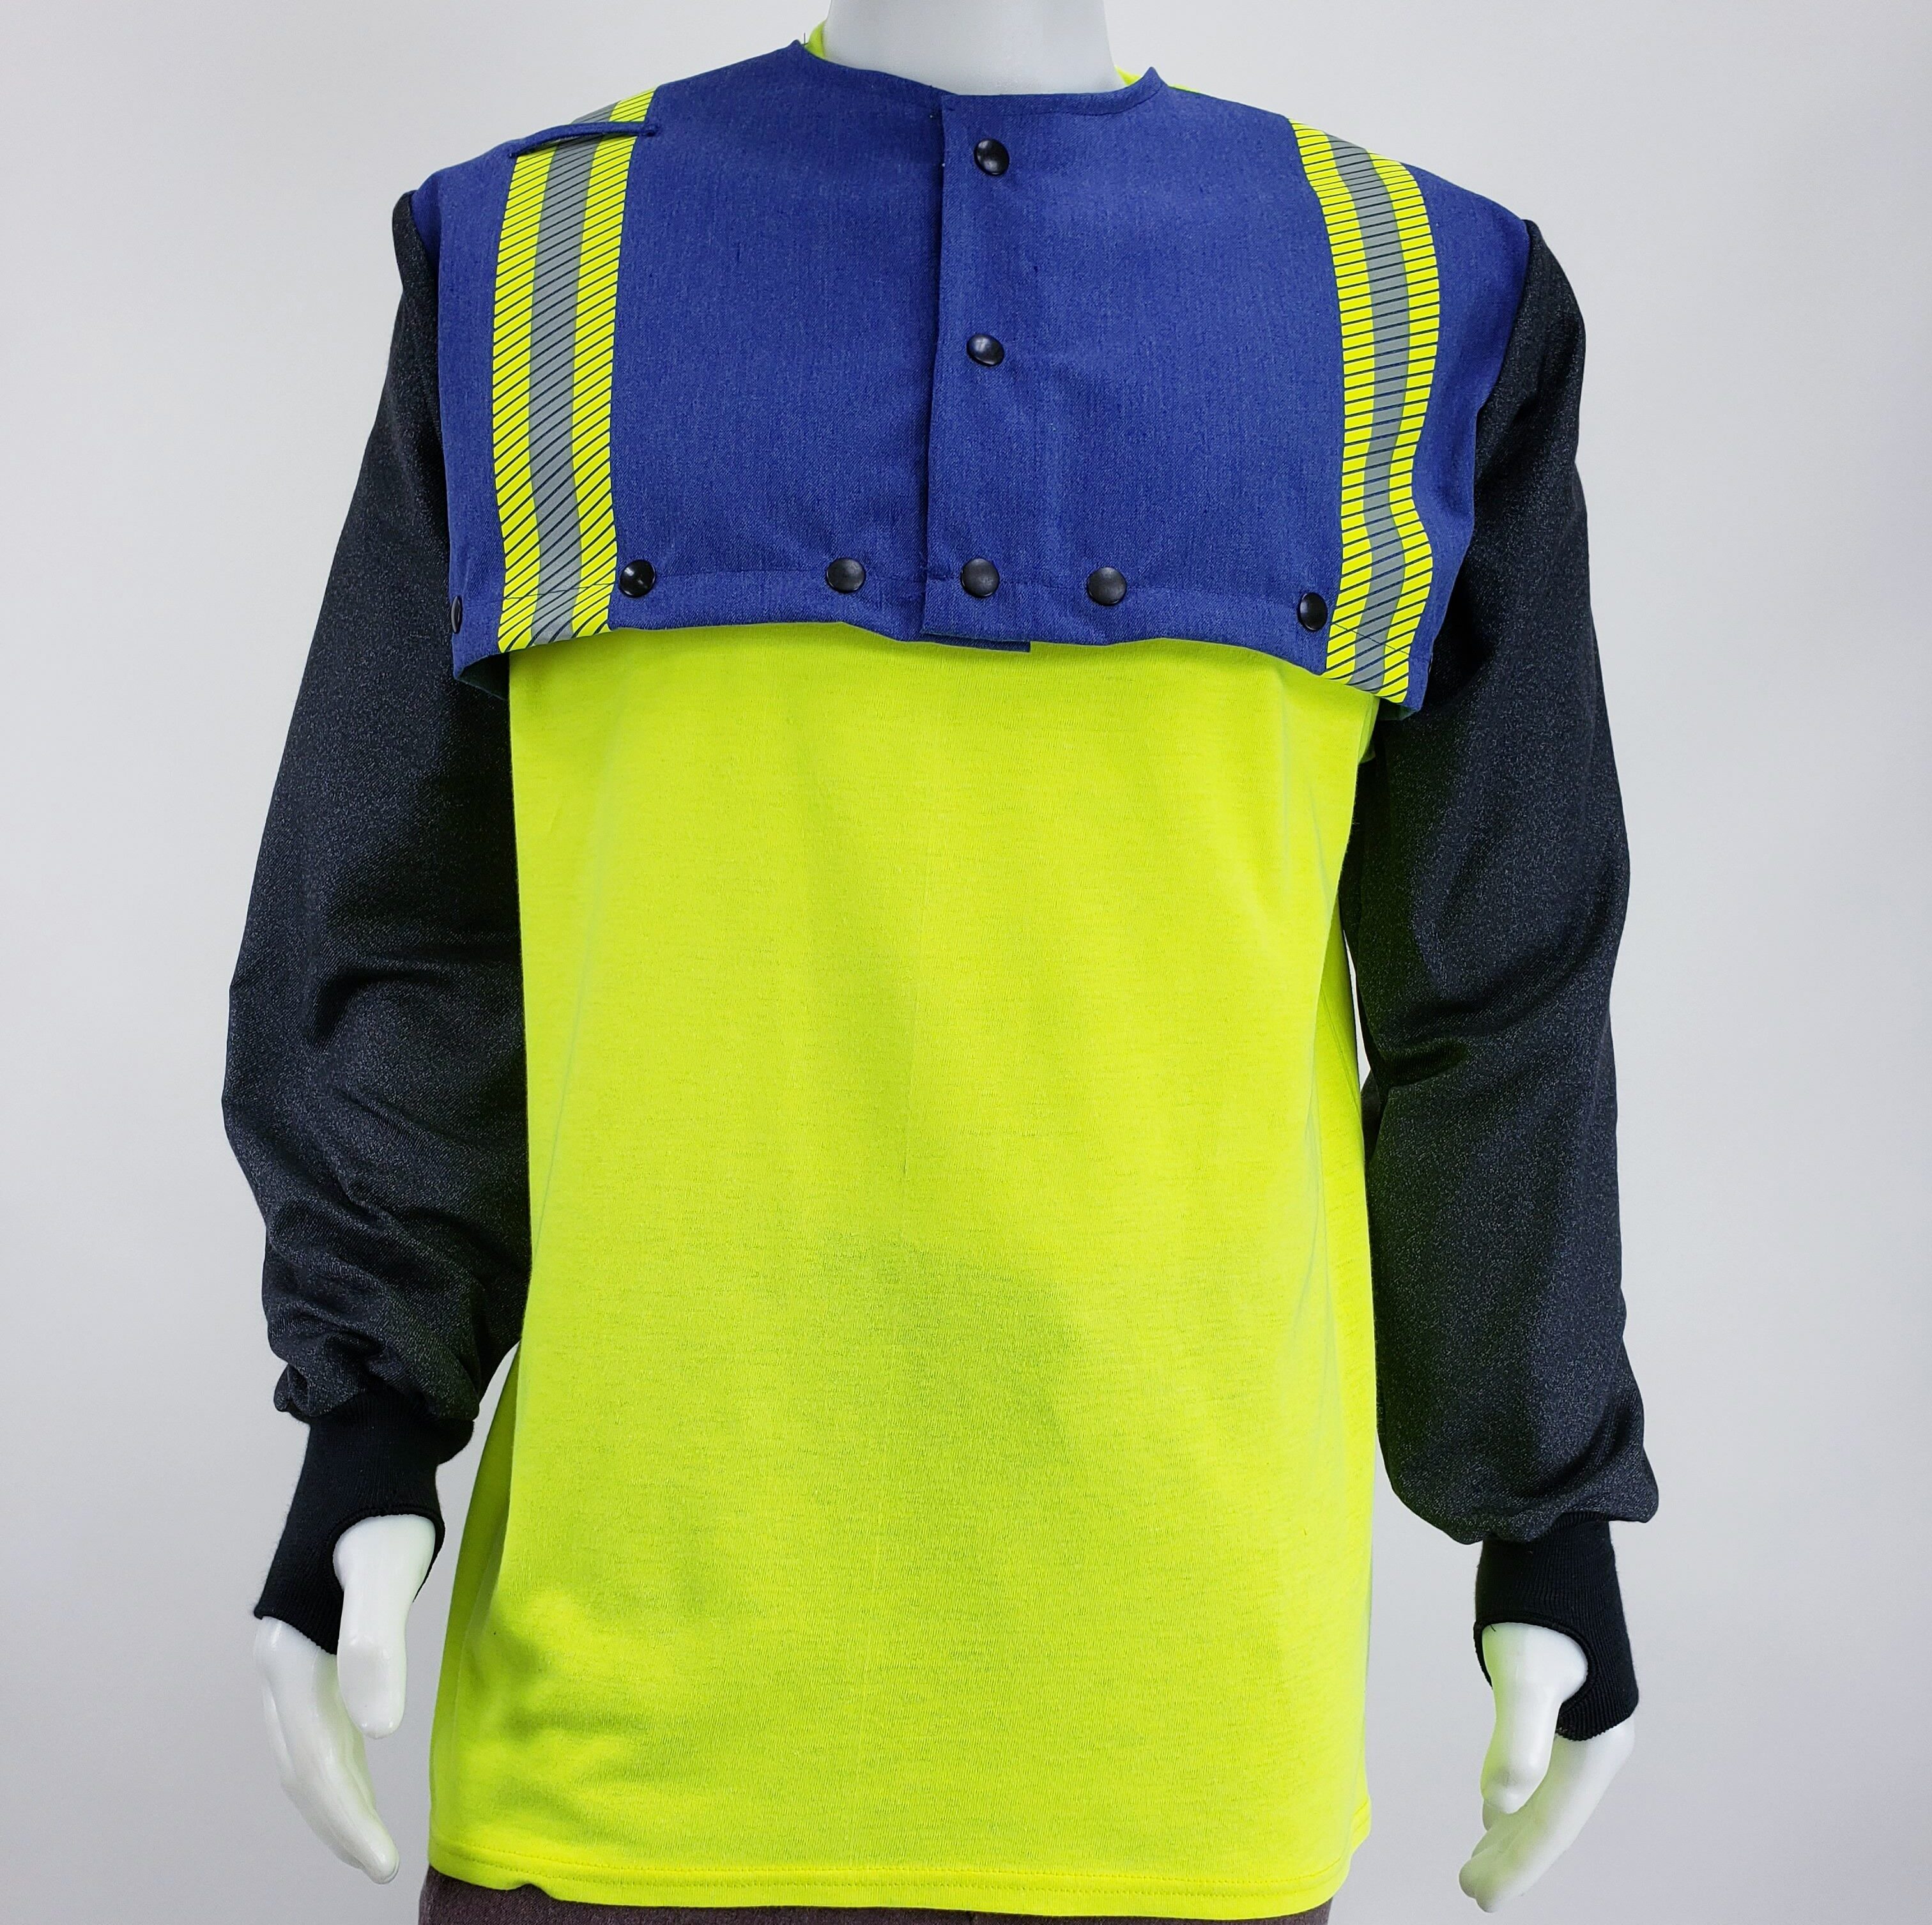 General Assembly Safety Apparel